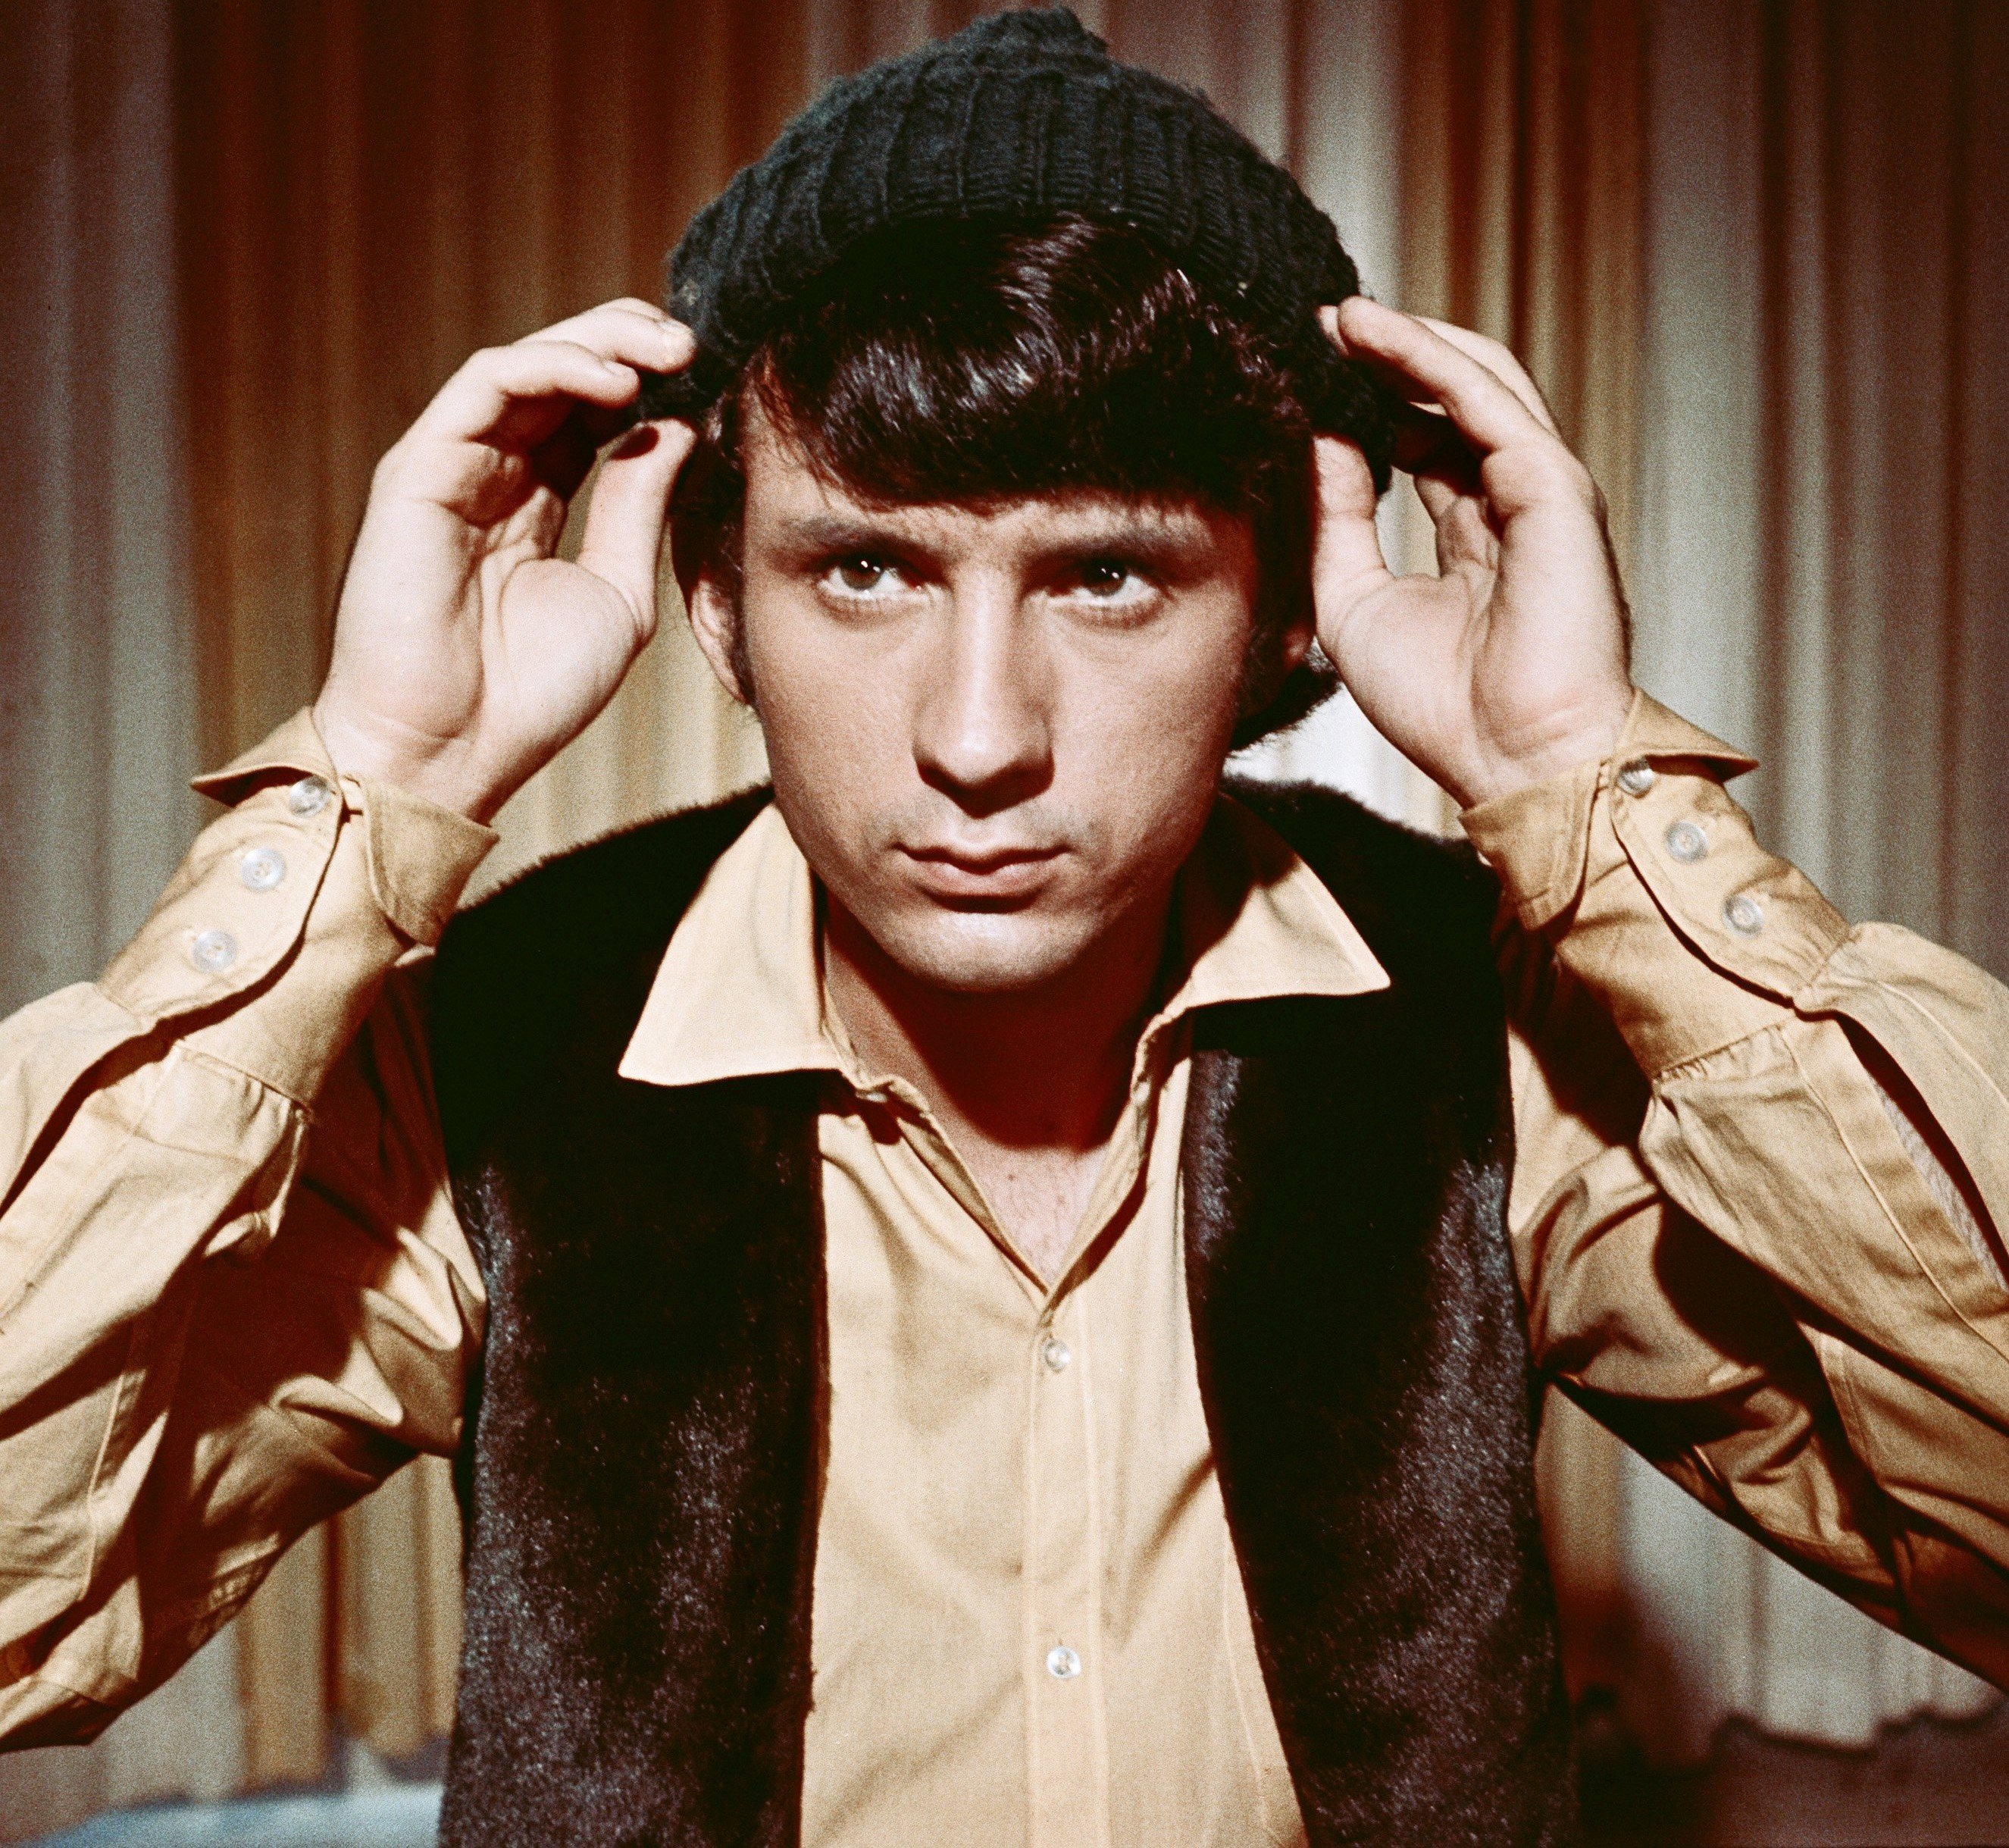 The Monkees' Mike Nesmith in front of a curtain